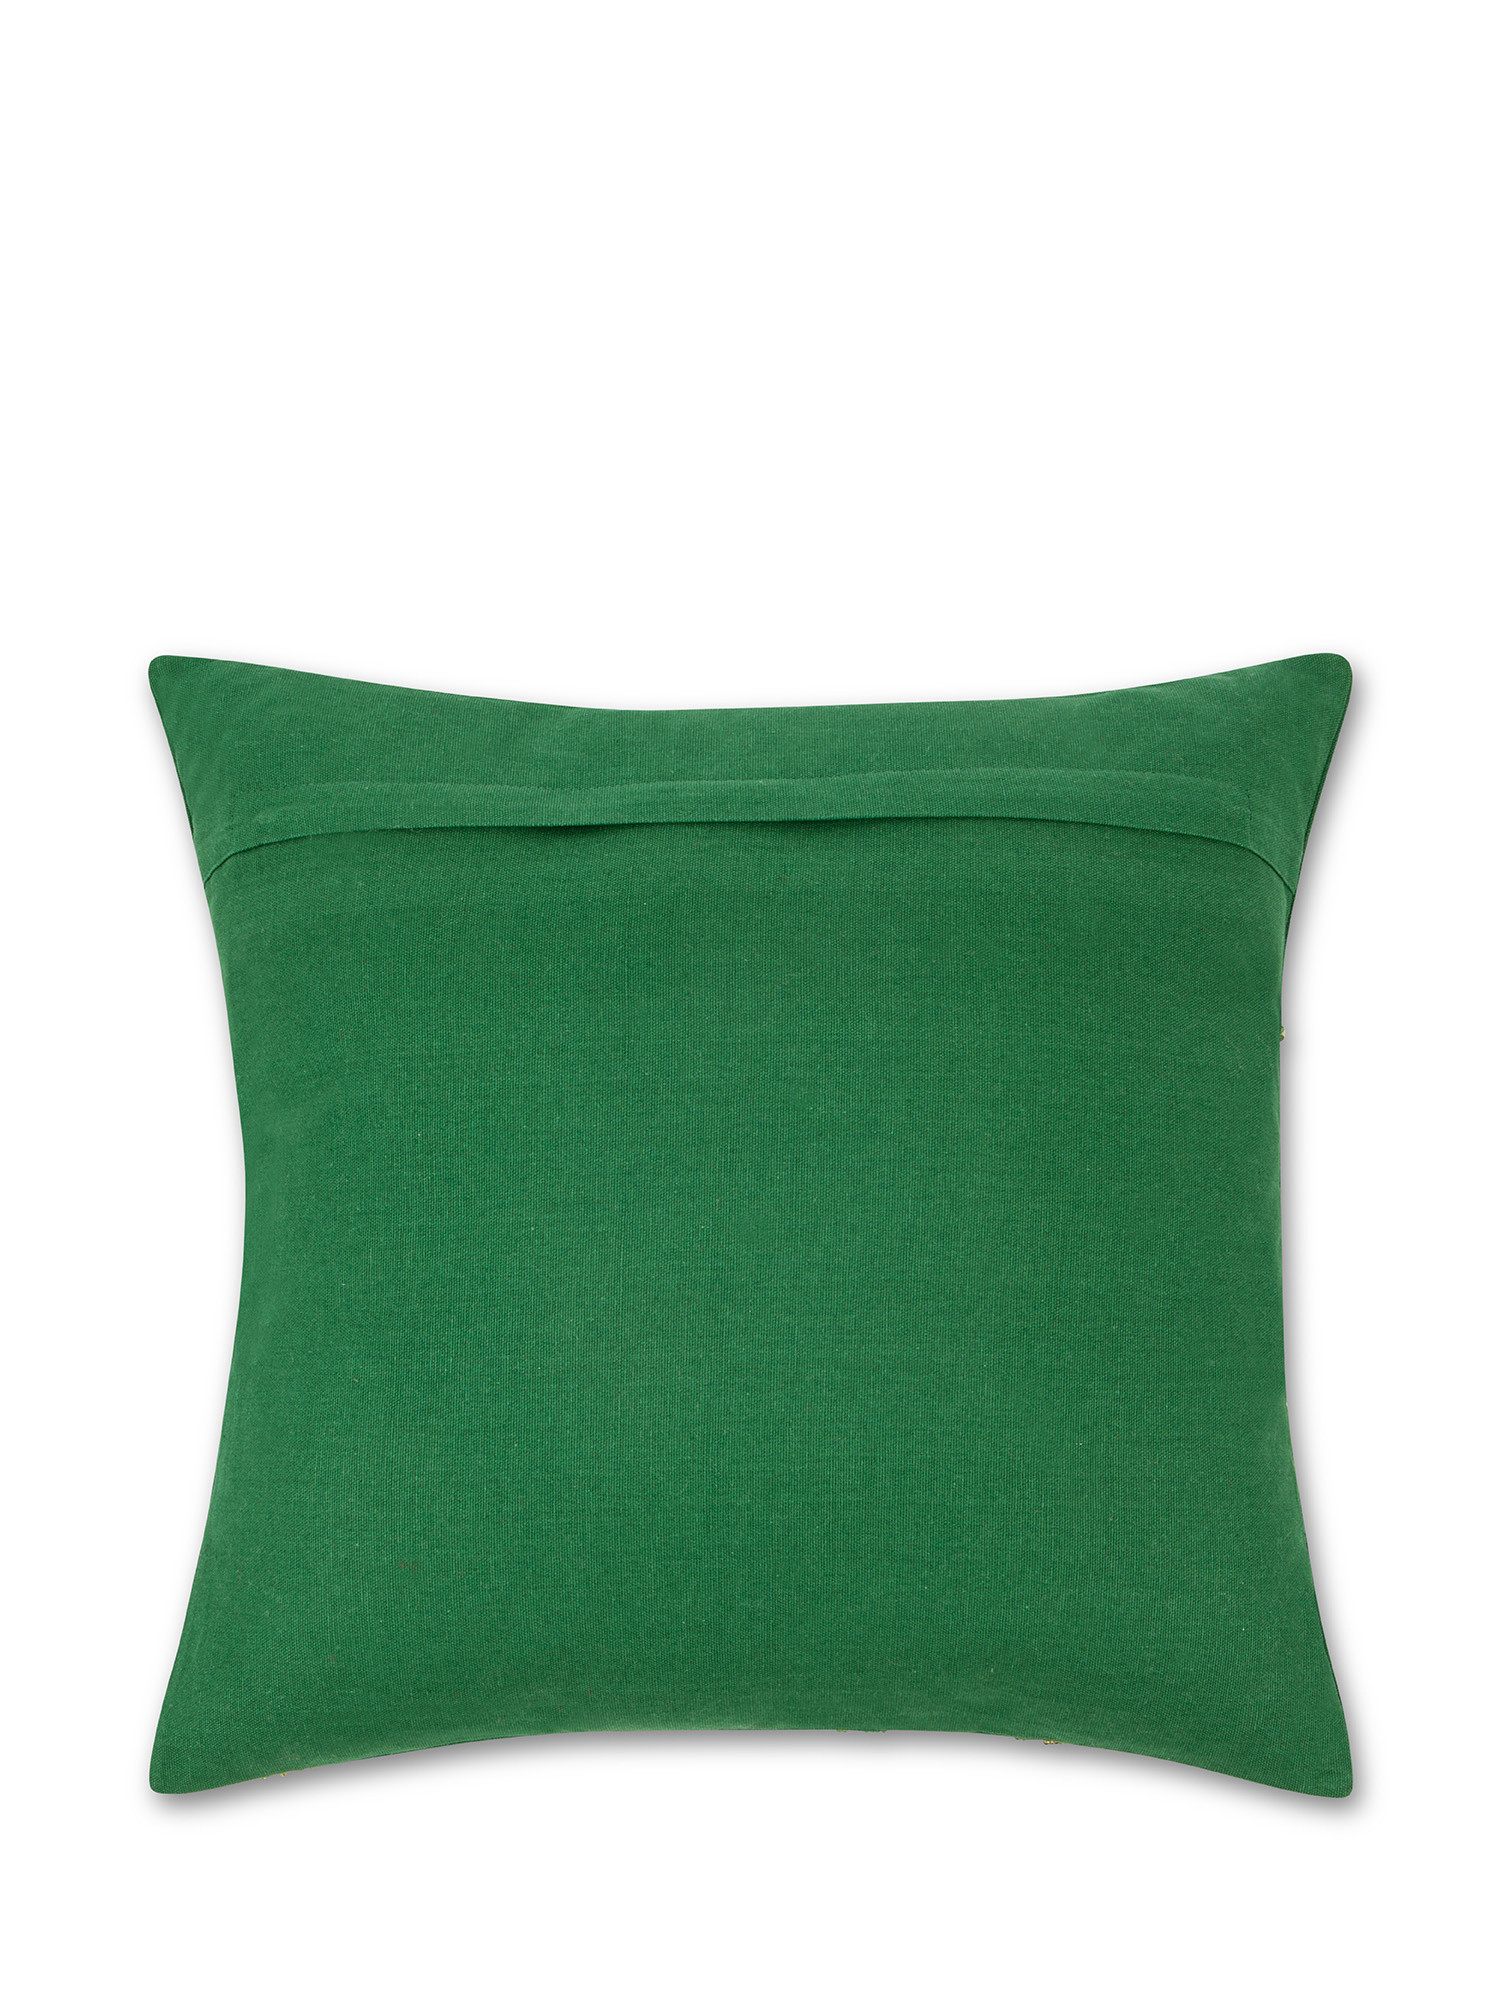 Beaded embroidery fabric cushion 45x45cm, Green, large image number 1